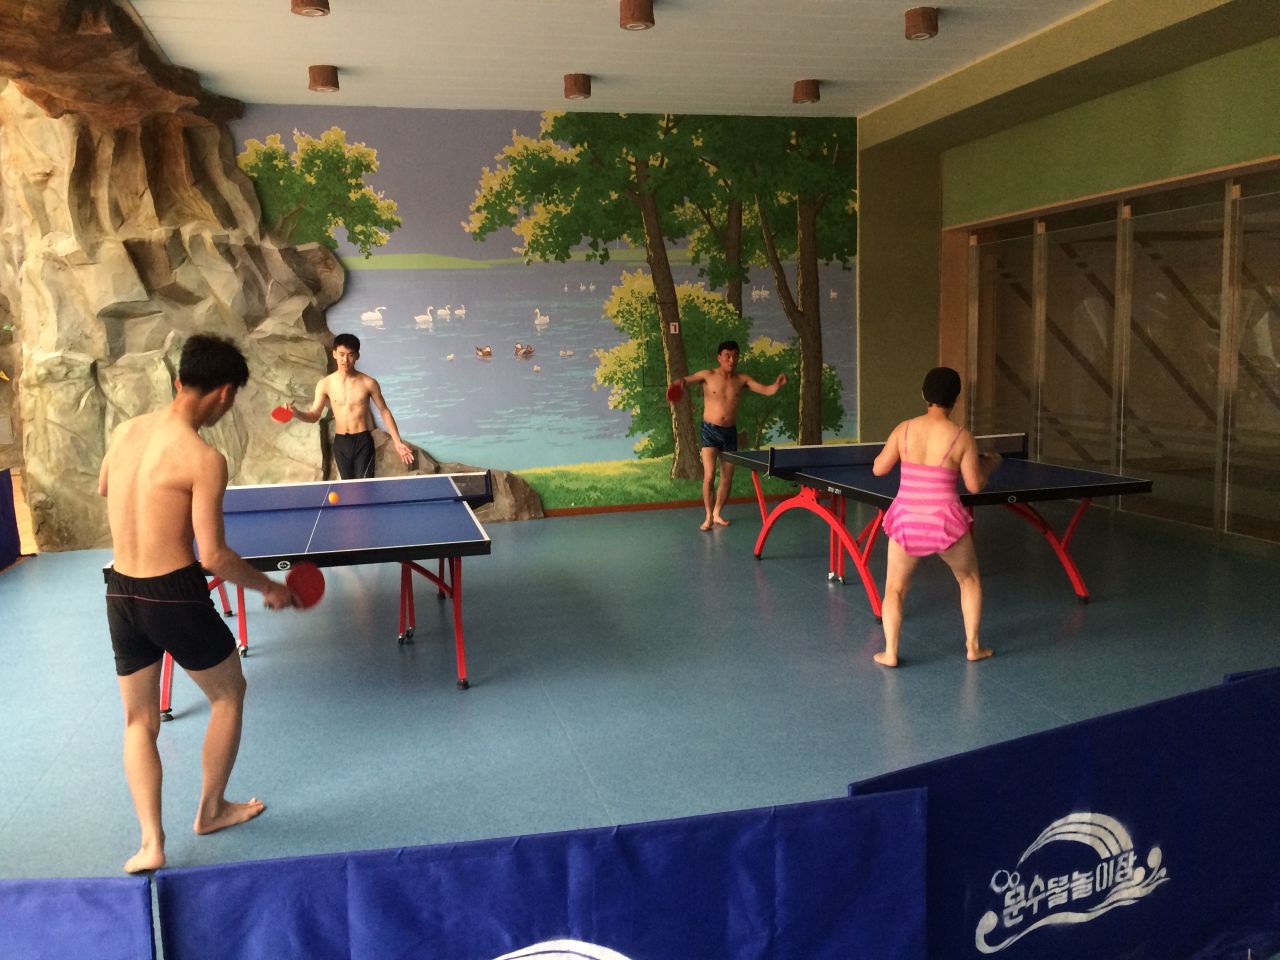 Pyongyang residents play table tennis at a water park in the North Korean capital.